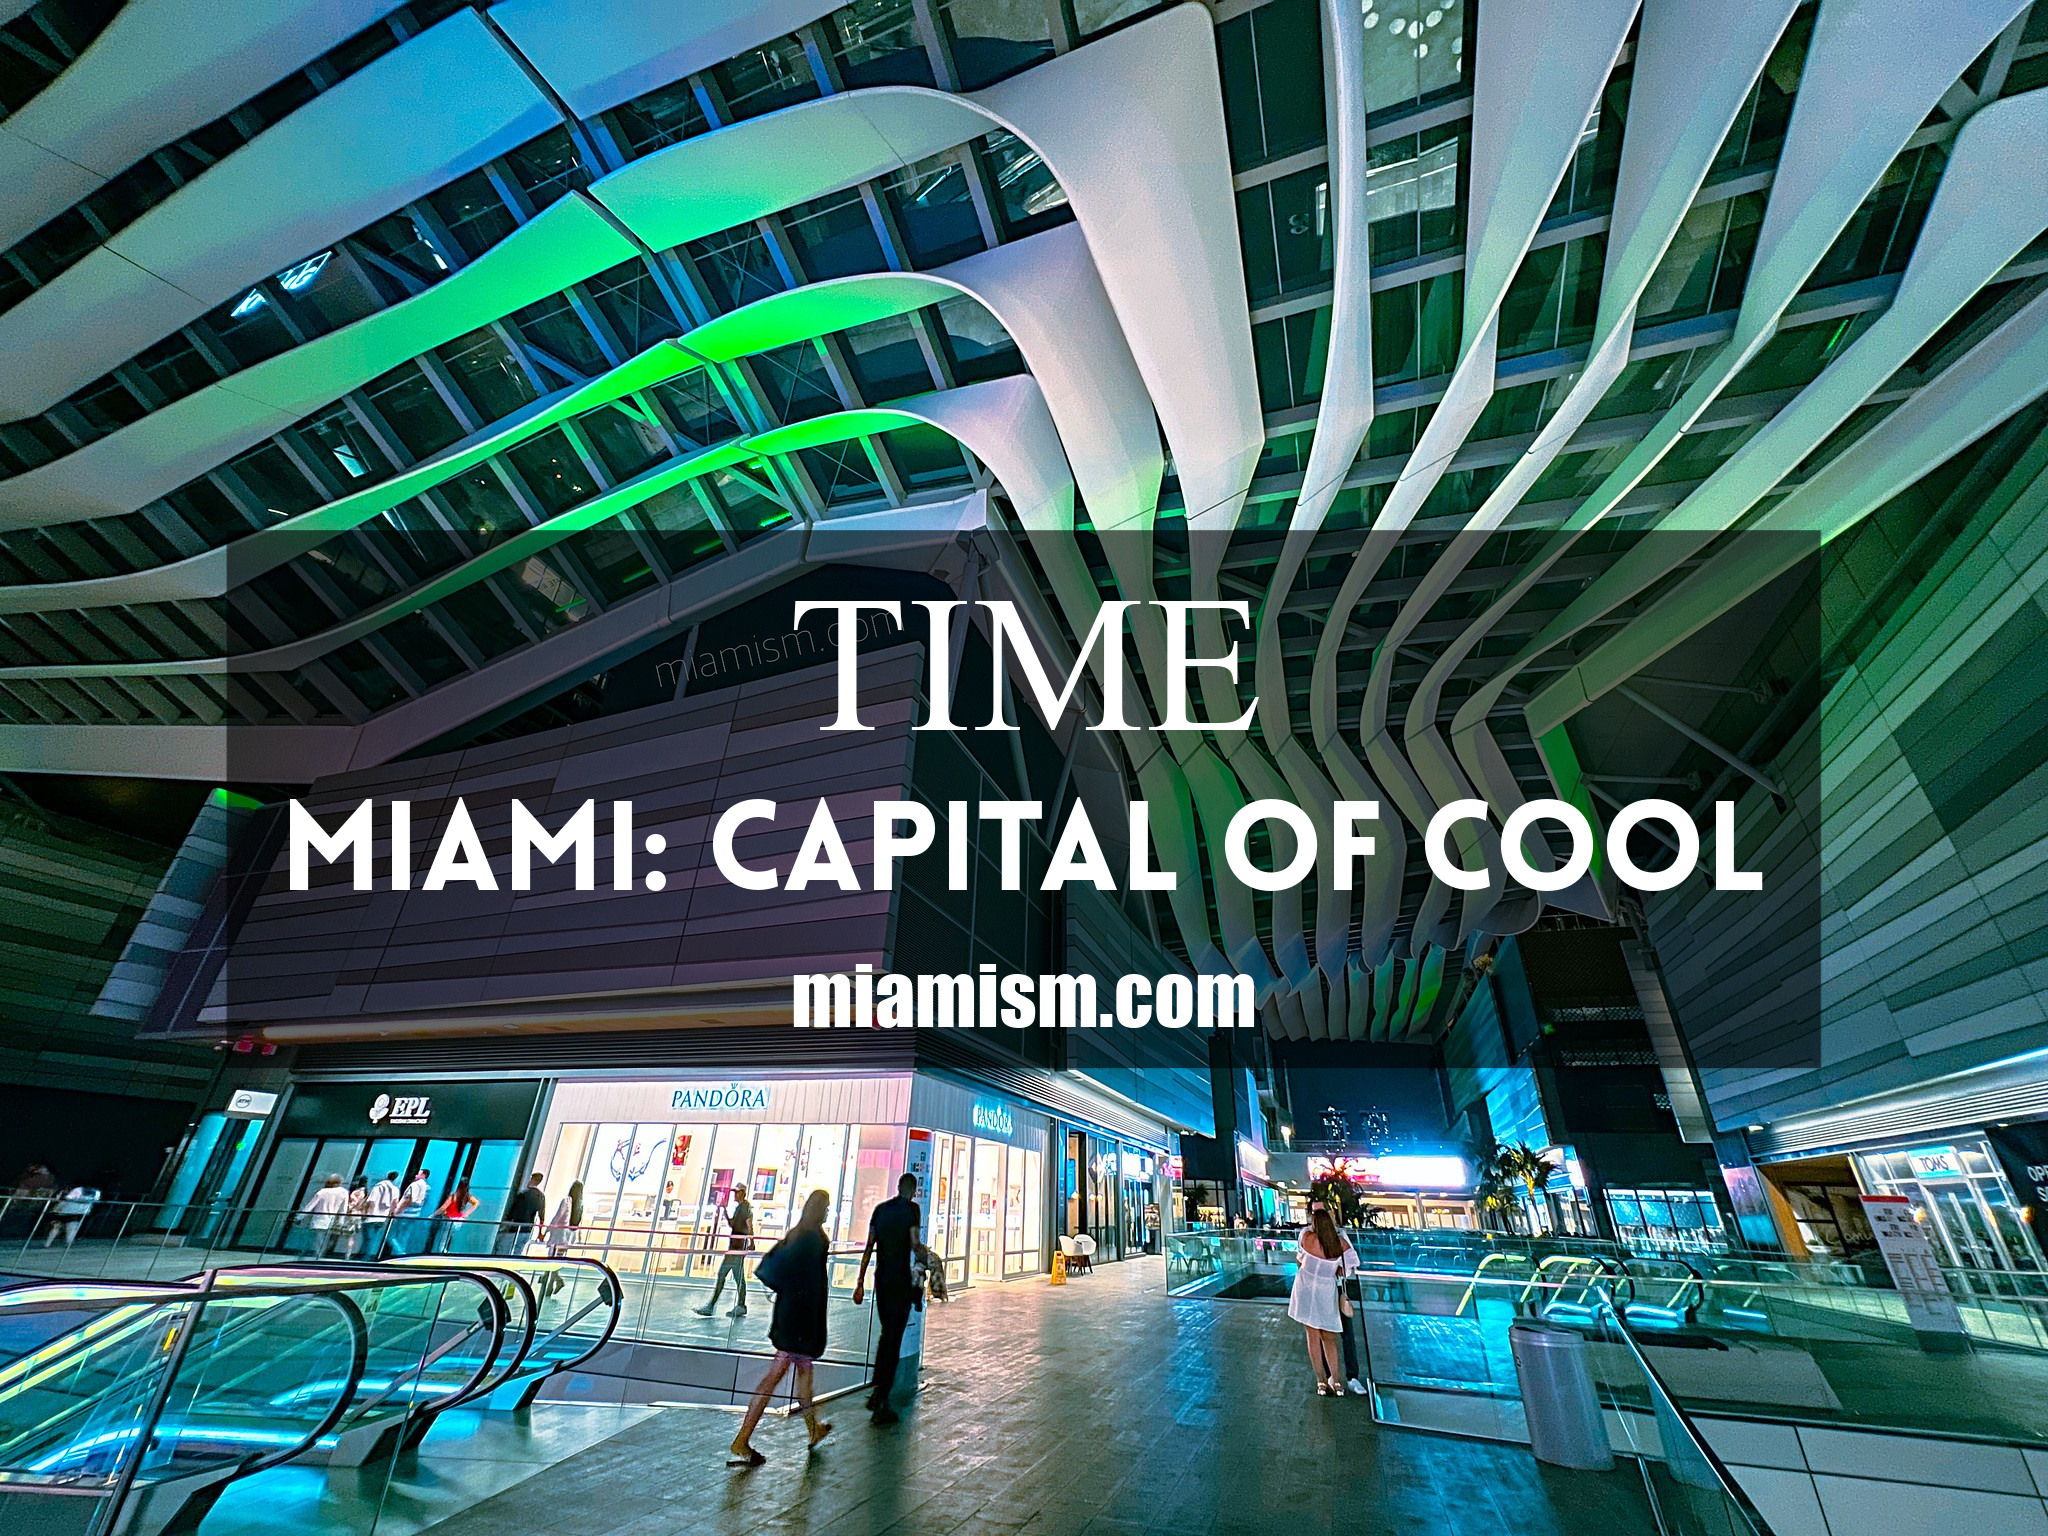 Miami is The Capital of Cool by TIME Magazine